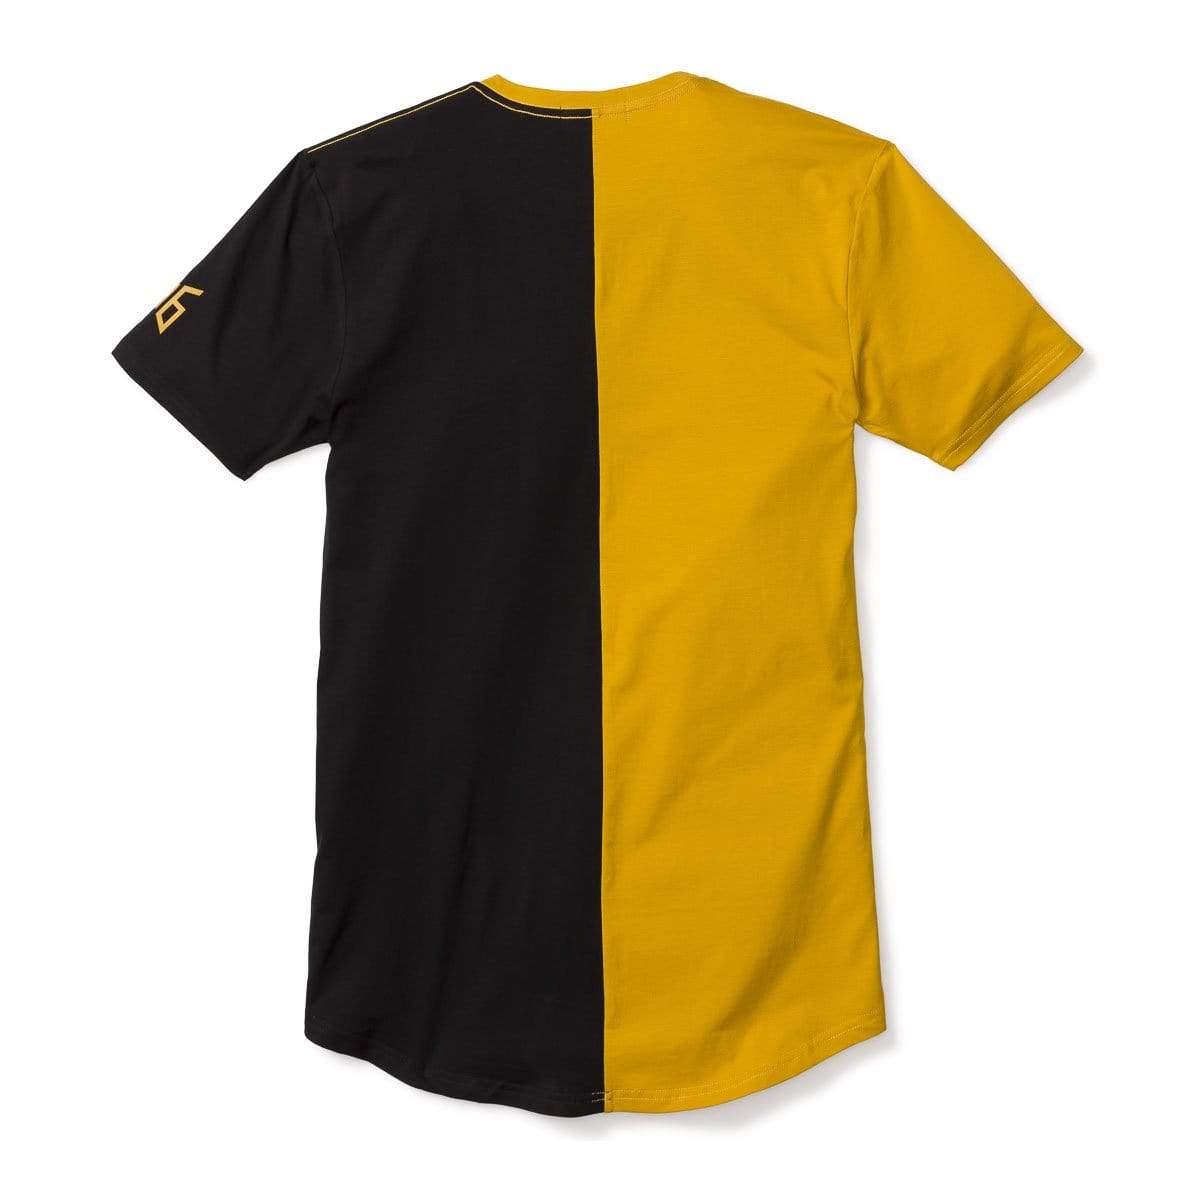 3:16 Collection Apparel Salvation Vertical Block Swoop Tee - Black and Gold